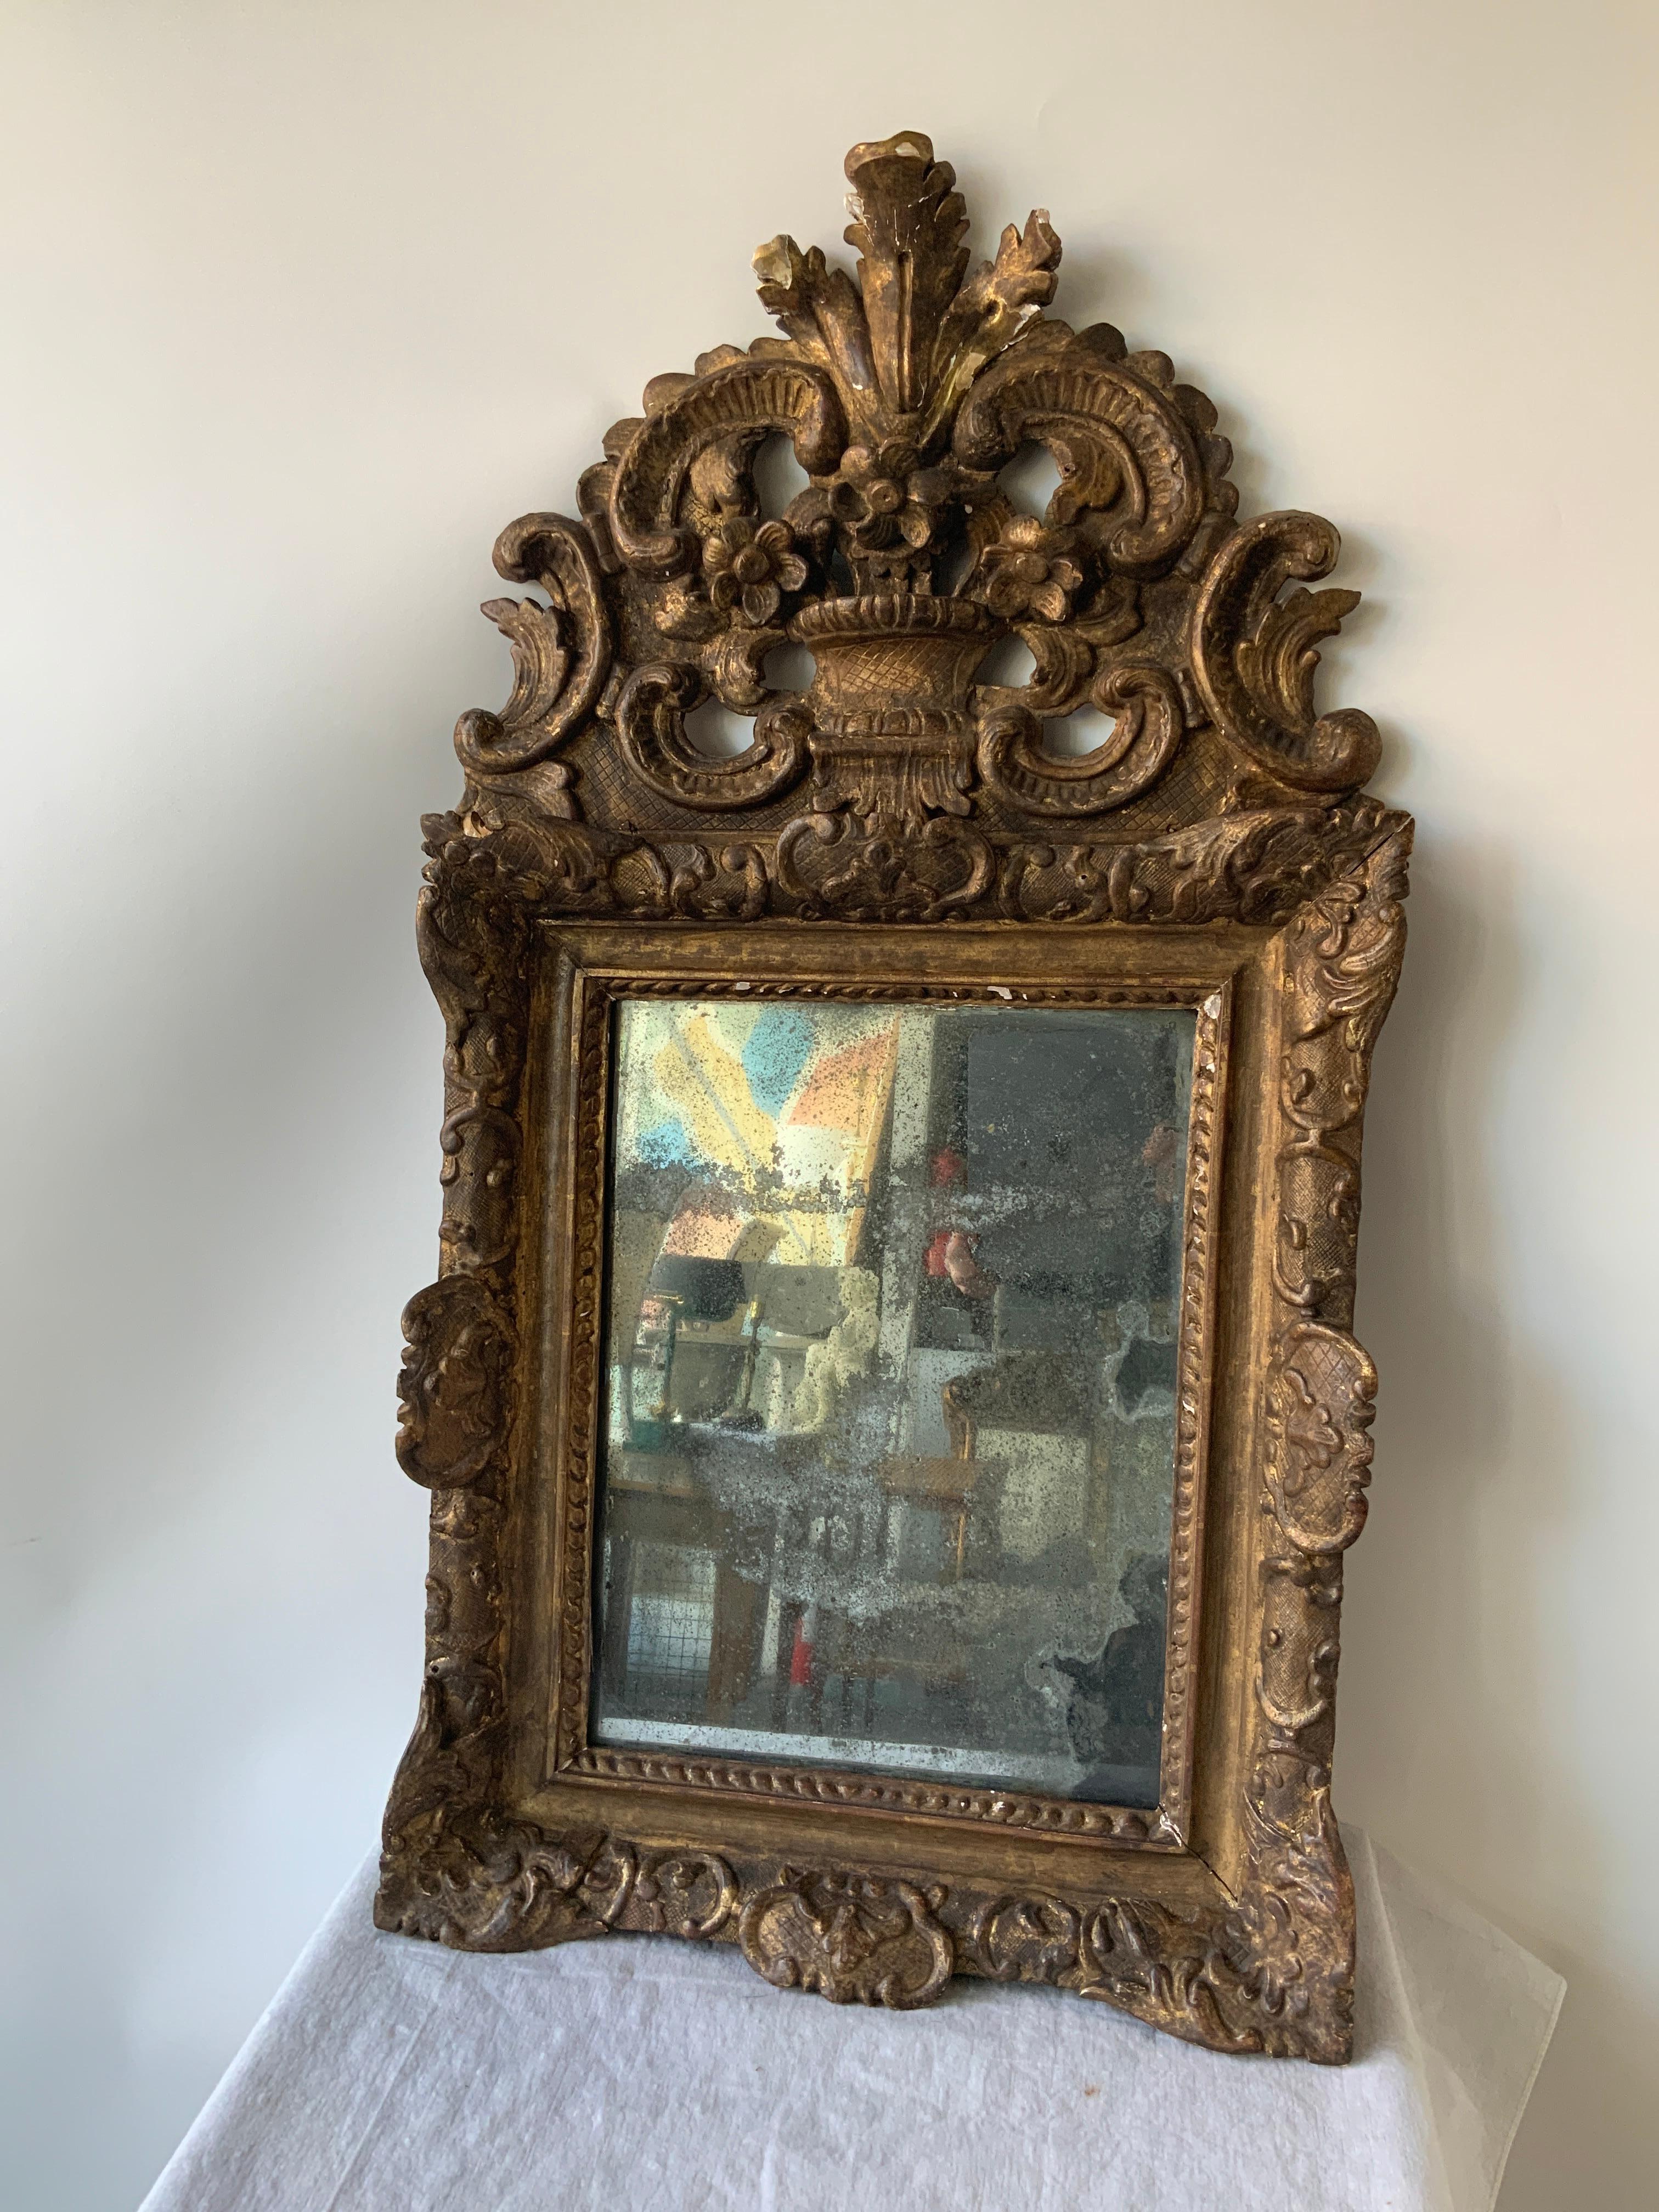 1760s French Provincial carved wood mirror. Mirror has age spots, it’s hard to see your reflection in it.